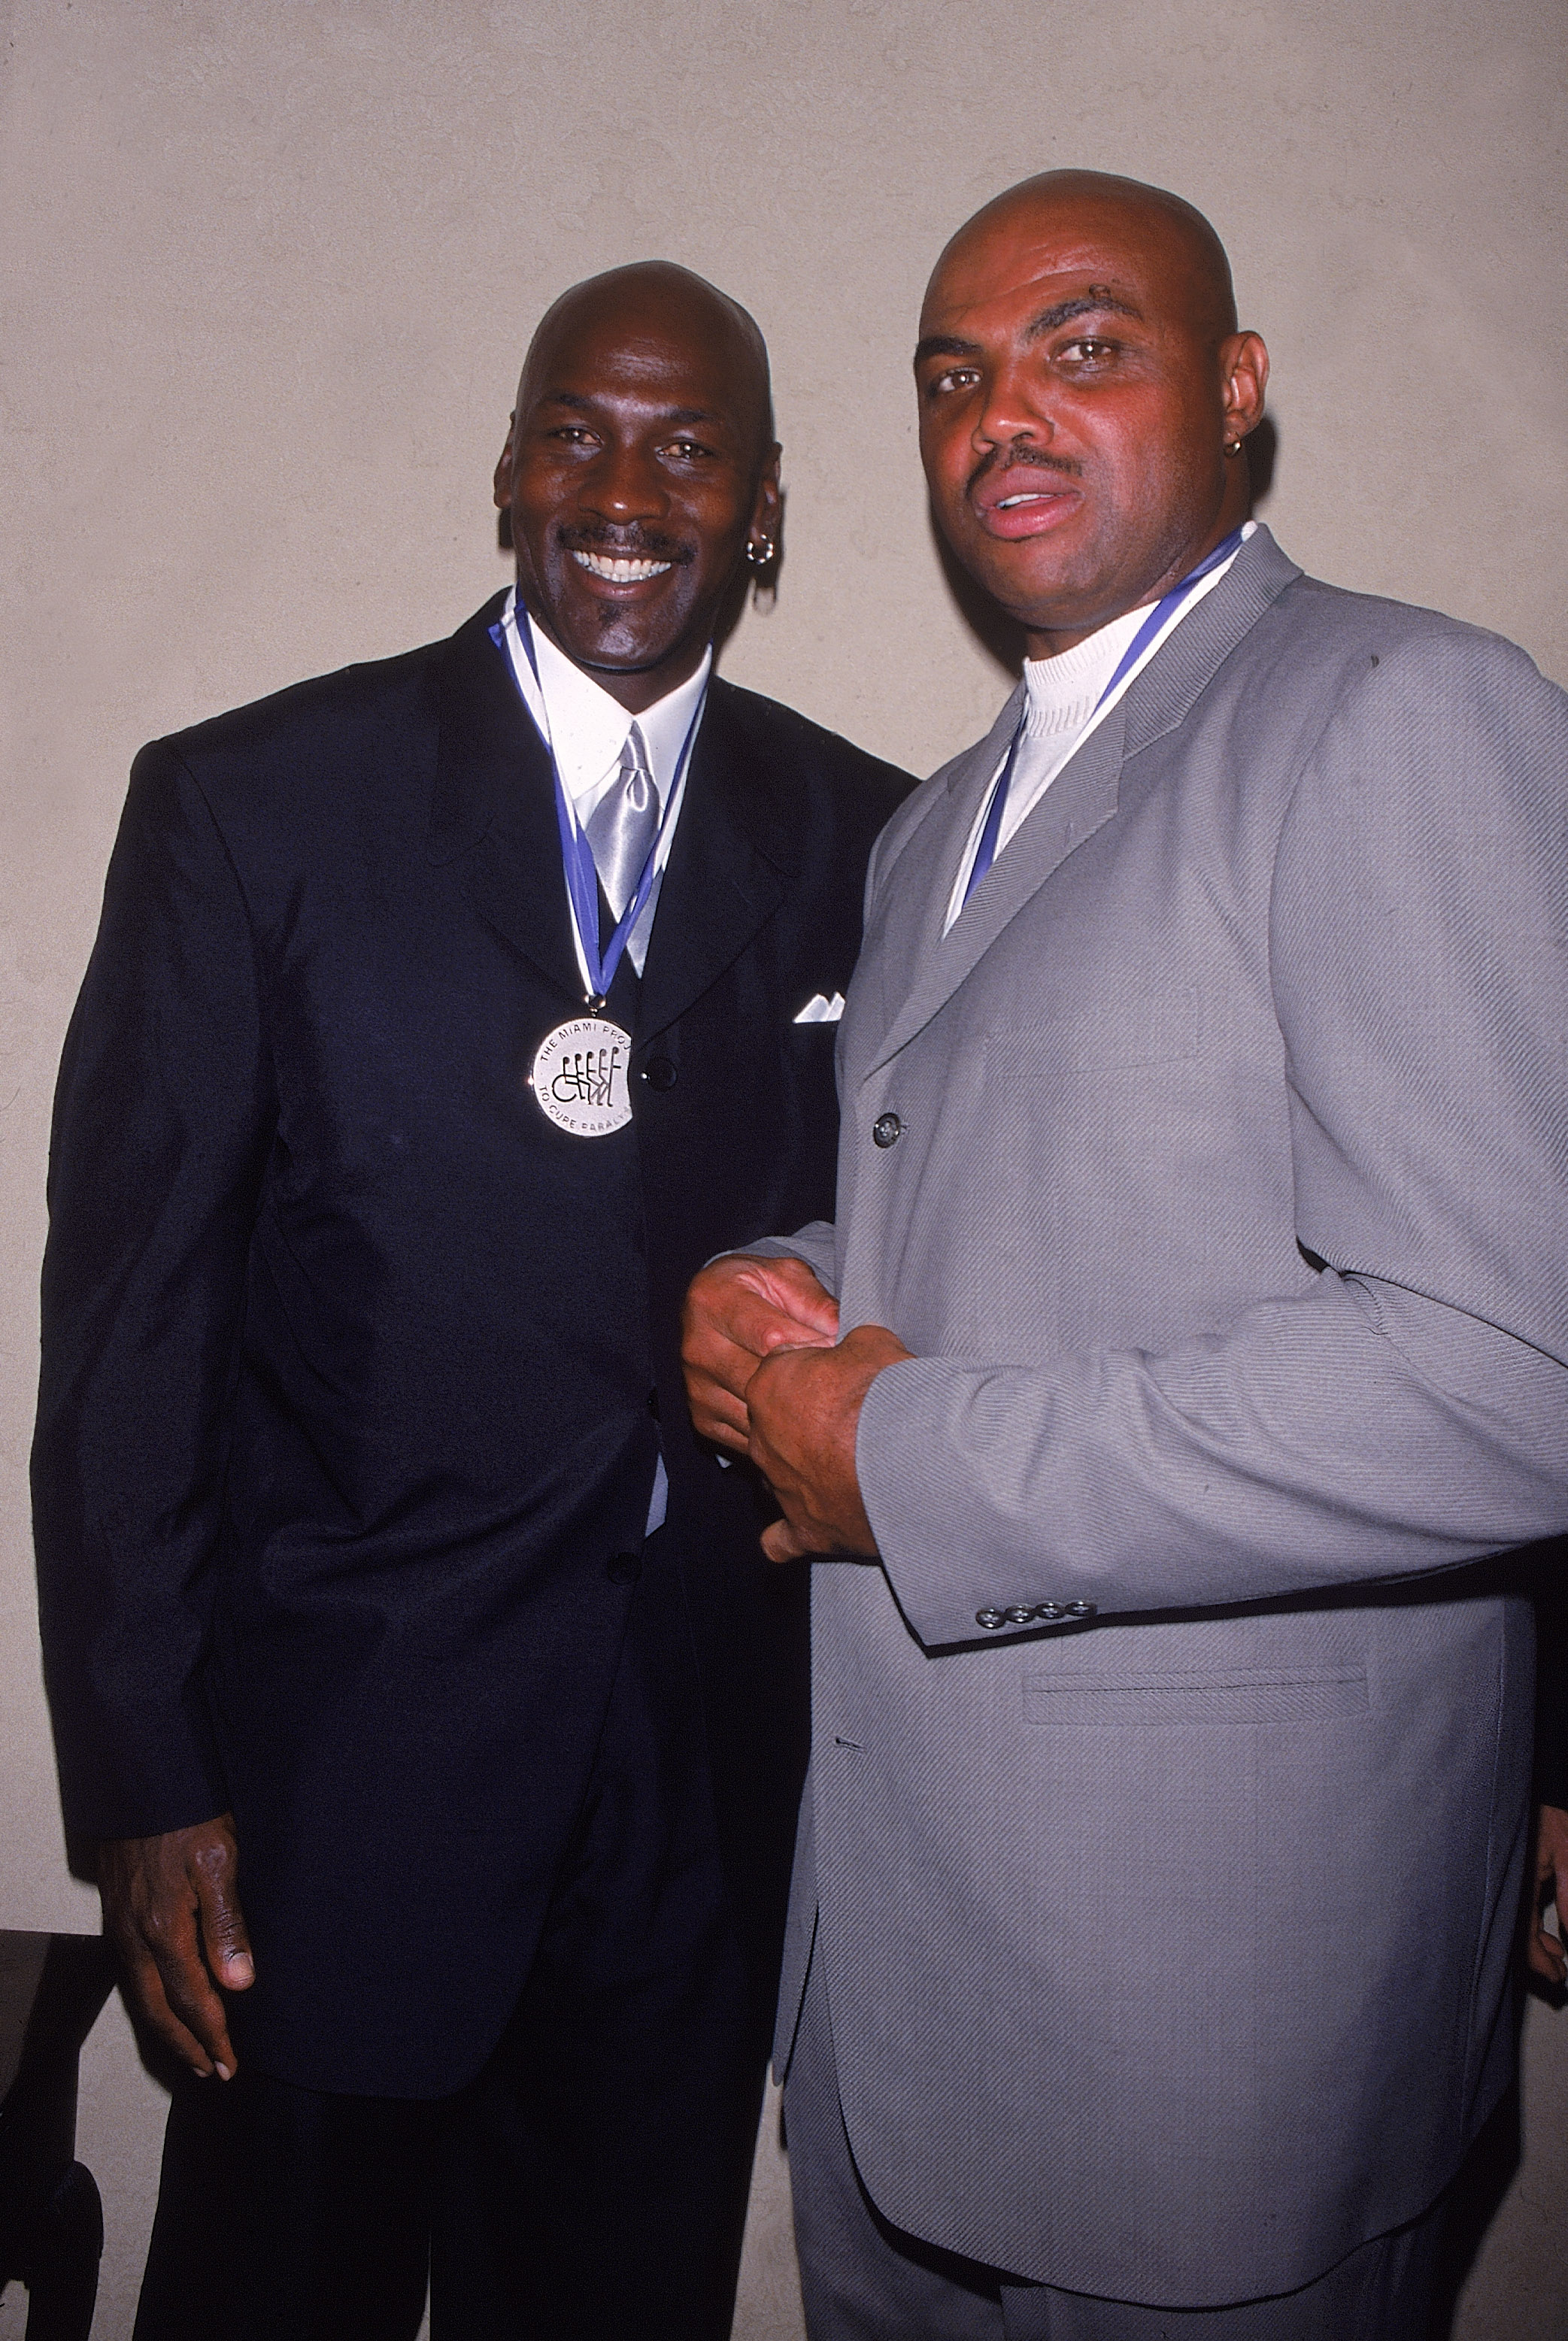 (L-R) Basketball players Michael Jordan and Charles Barkley at Great Sports Legend Dinner on 26 Sept., 2000. (Sylvain Gaboury—The LIFE Picture Collection/Getty Images)